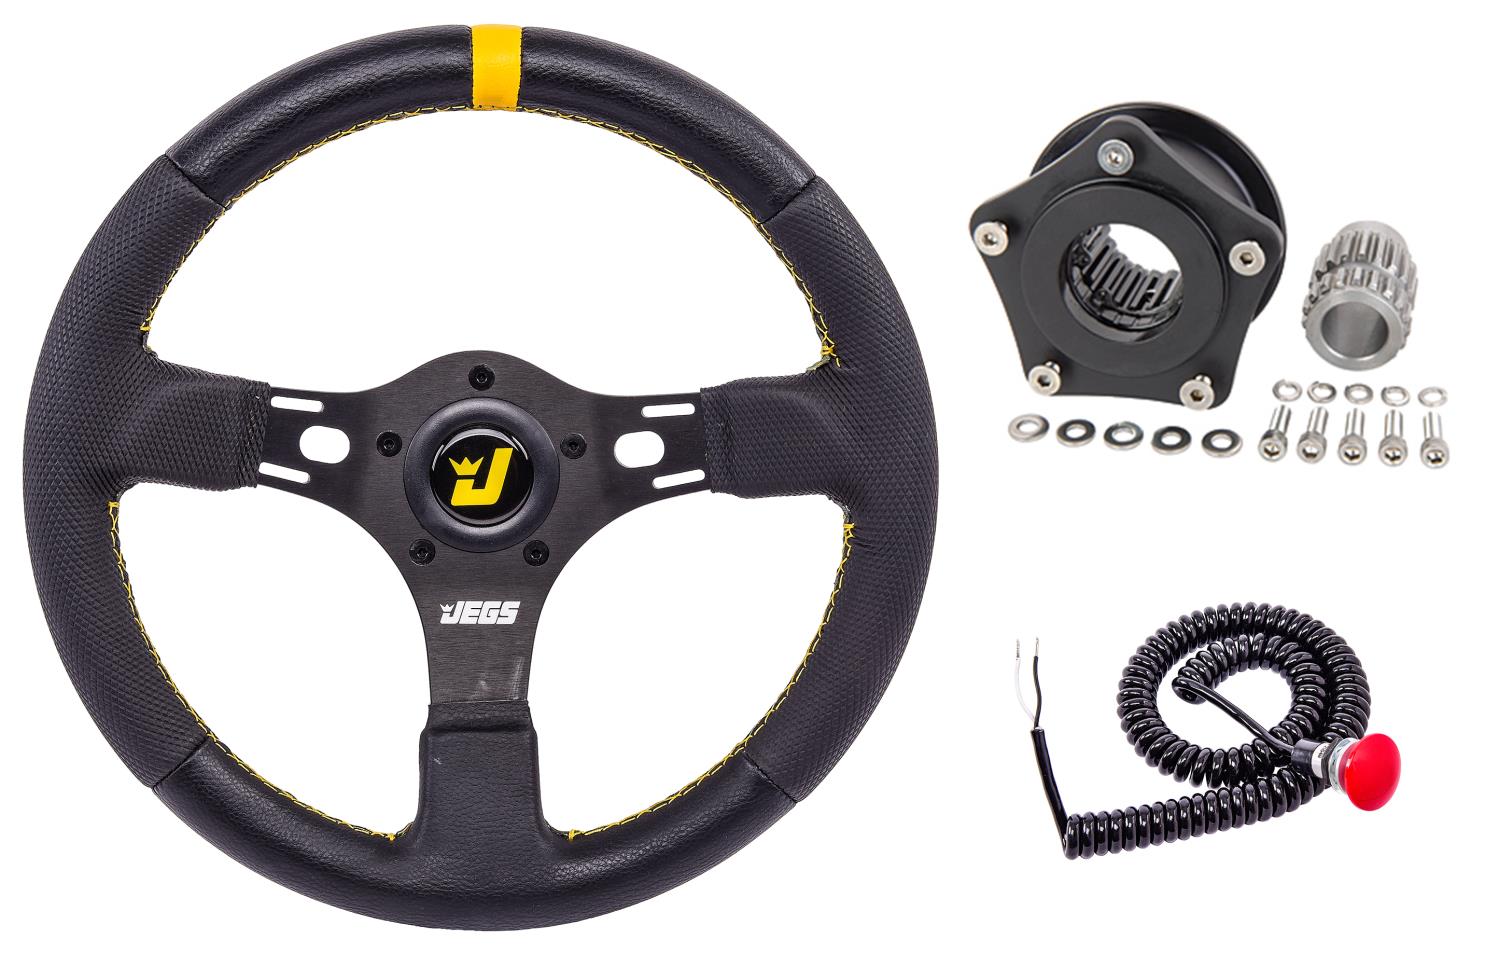 JEGS 70433K1 Premium Drag Race Steering Wheel Kit with Quick Release GM Splined Hub and Micro Switch